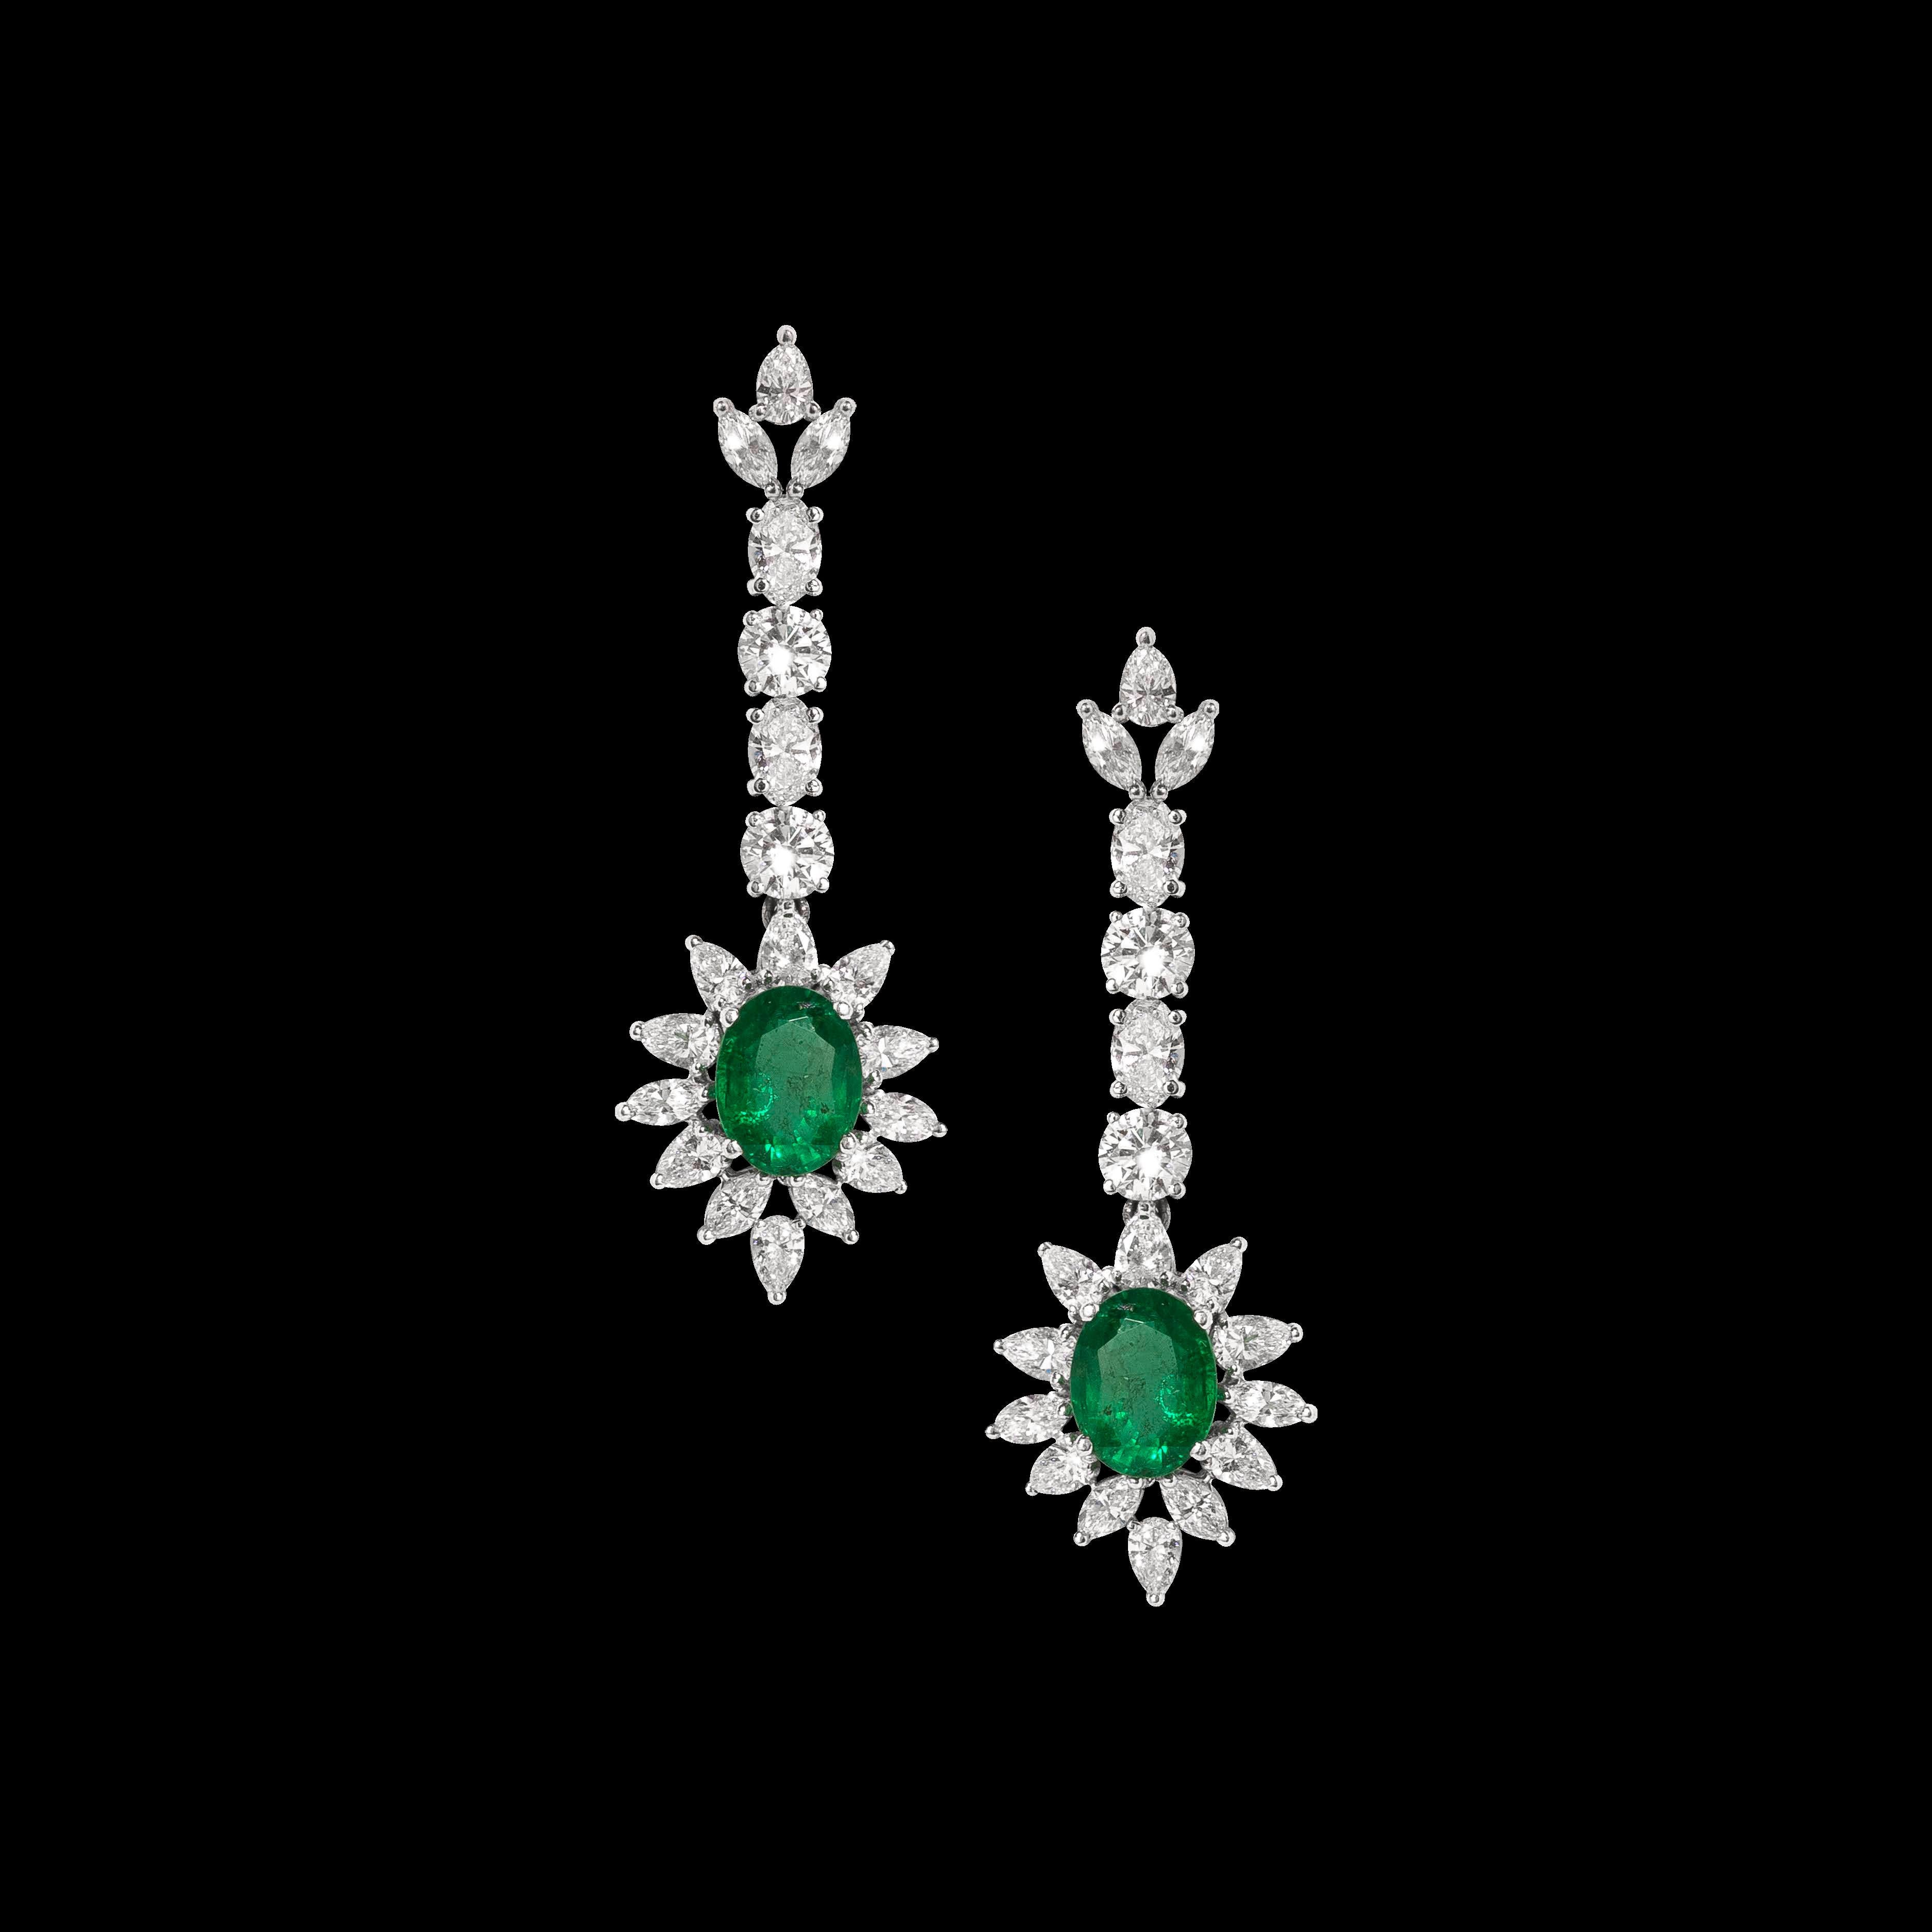 18 Karat White Gold Emerald and Diamond Plunge Necklace Set

Handcrafted classy and delicate plunge necklace set with earrings, studded with fancy shaped white diamonds (VVS-VS Purity) and beautiful intense green emeralds. This beautiful neck piece